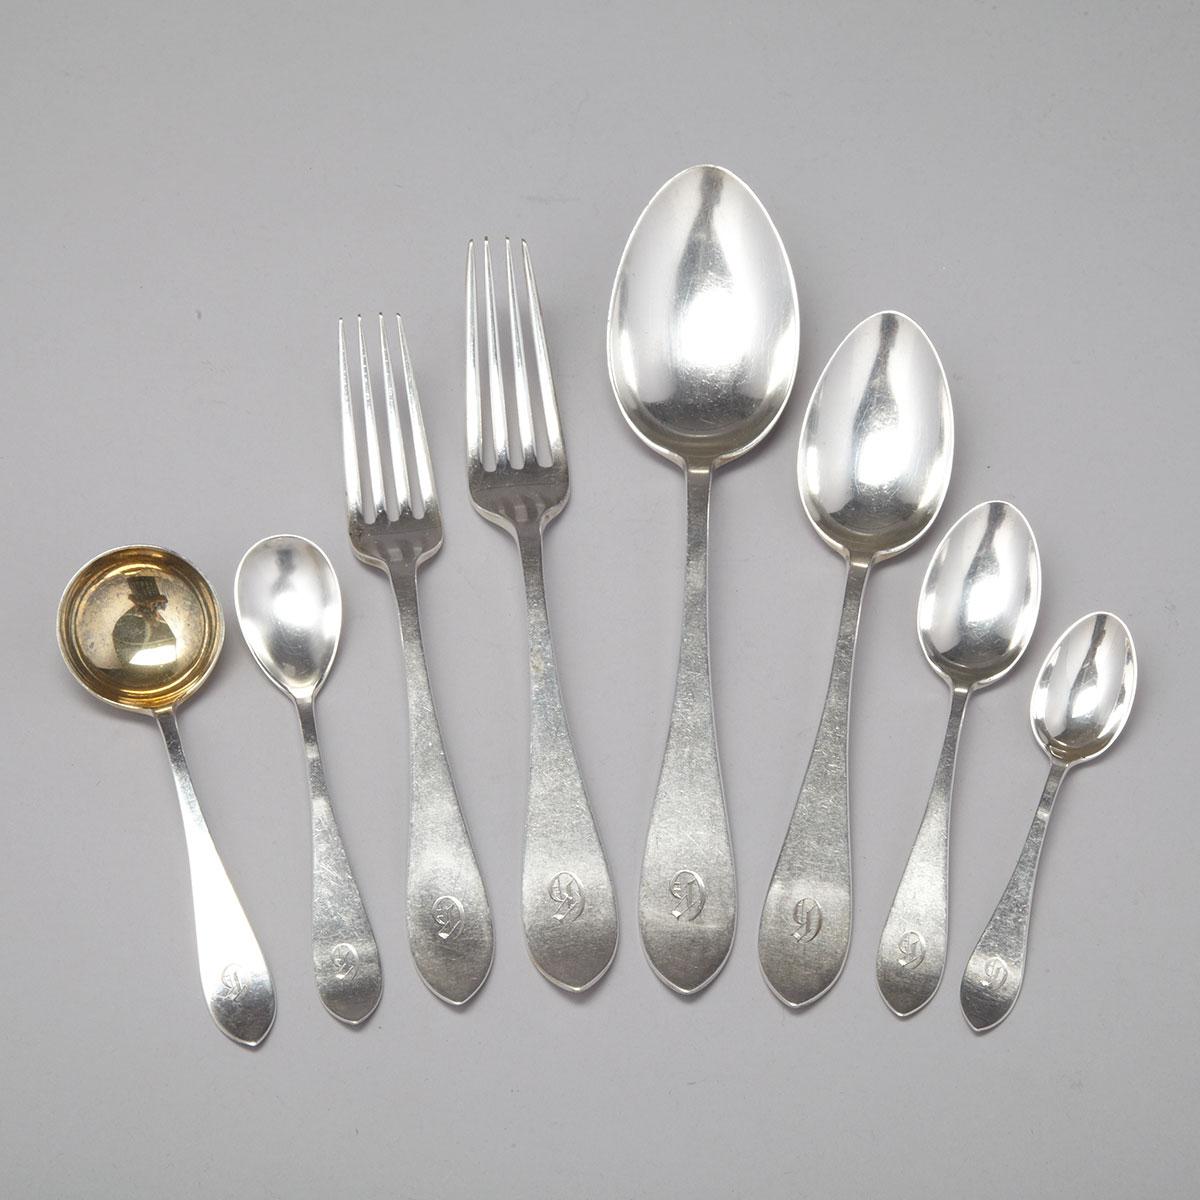 Canadian Silver ‘Tudor Plain’ Pattern Flatware, Ryrie Bros., Toronto, Ont., early 20th century